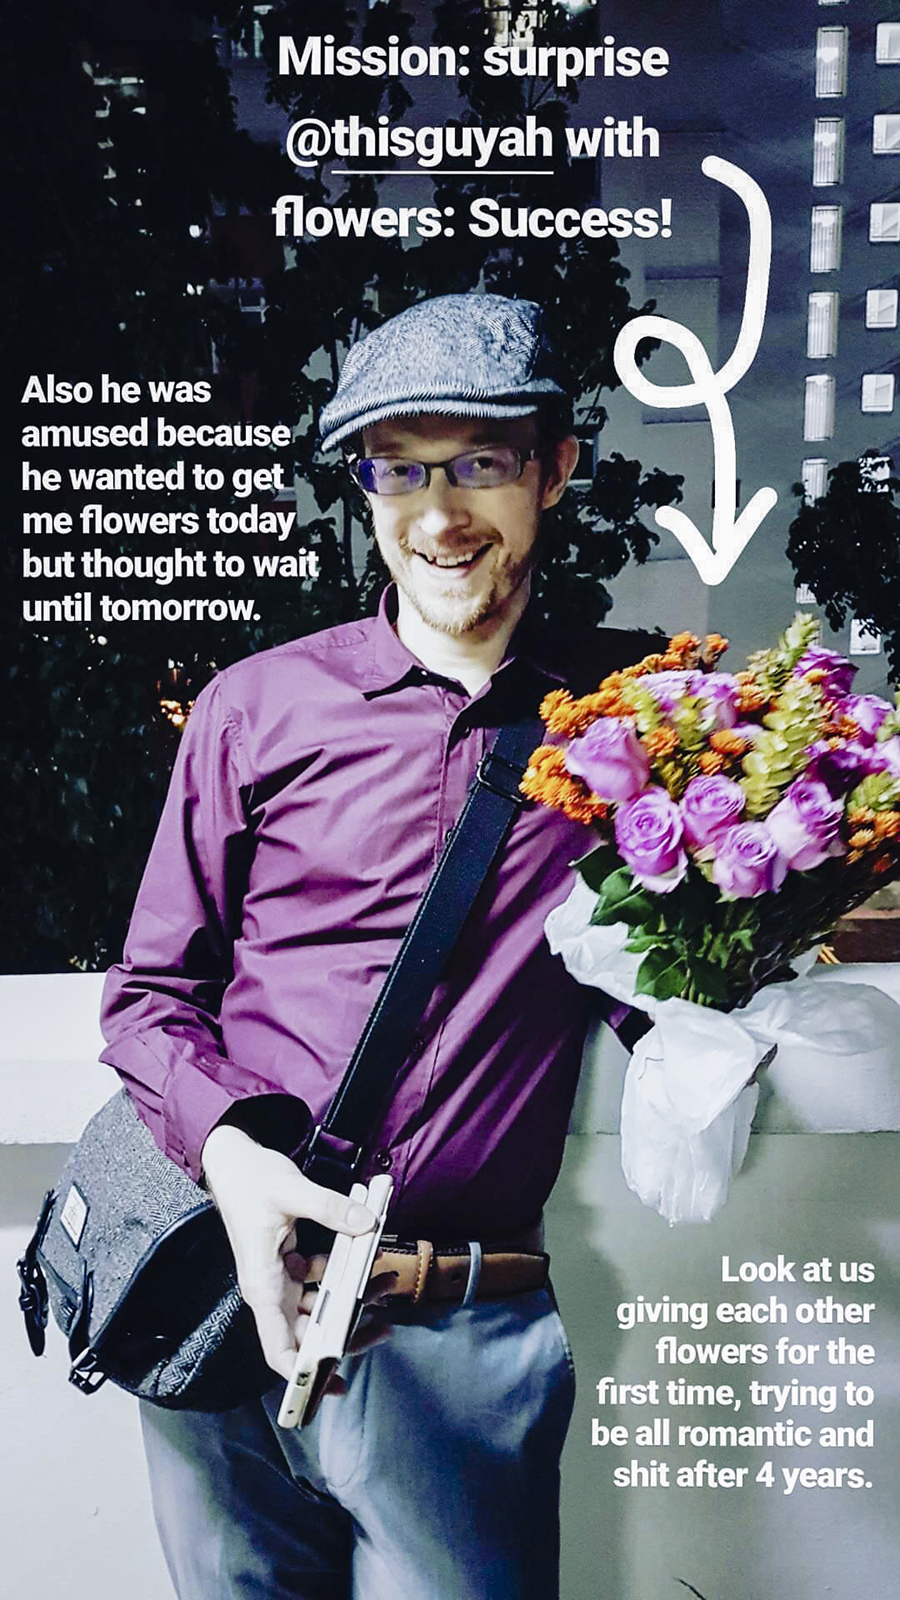 Instagram Story Pupuren of @thisguyah being surprised with a bouquet of colourful flowers.